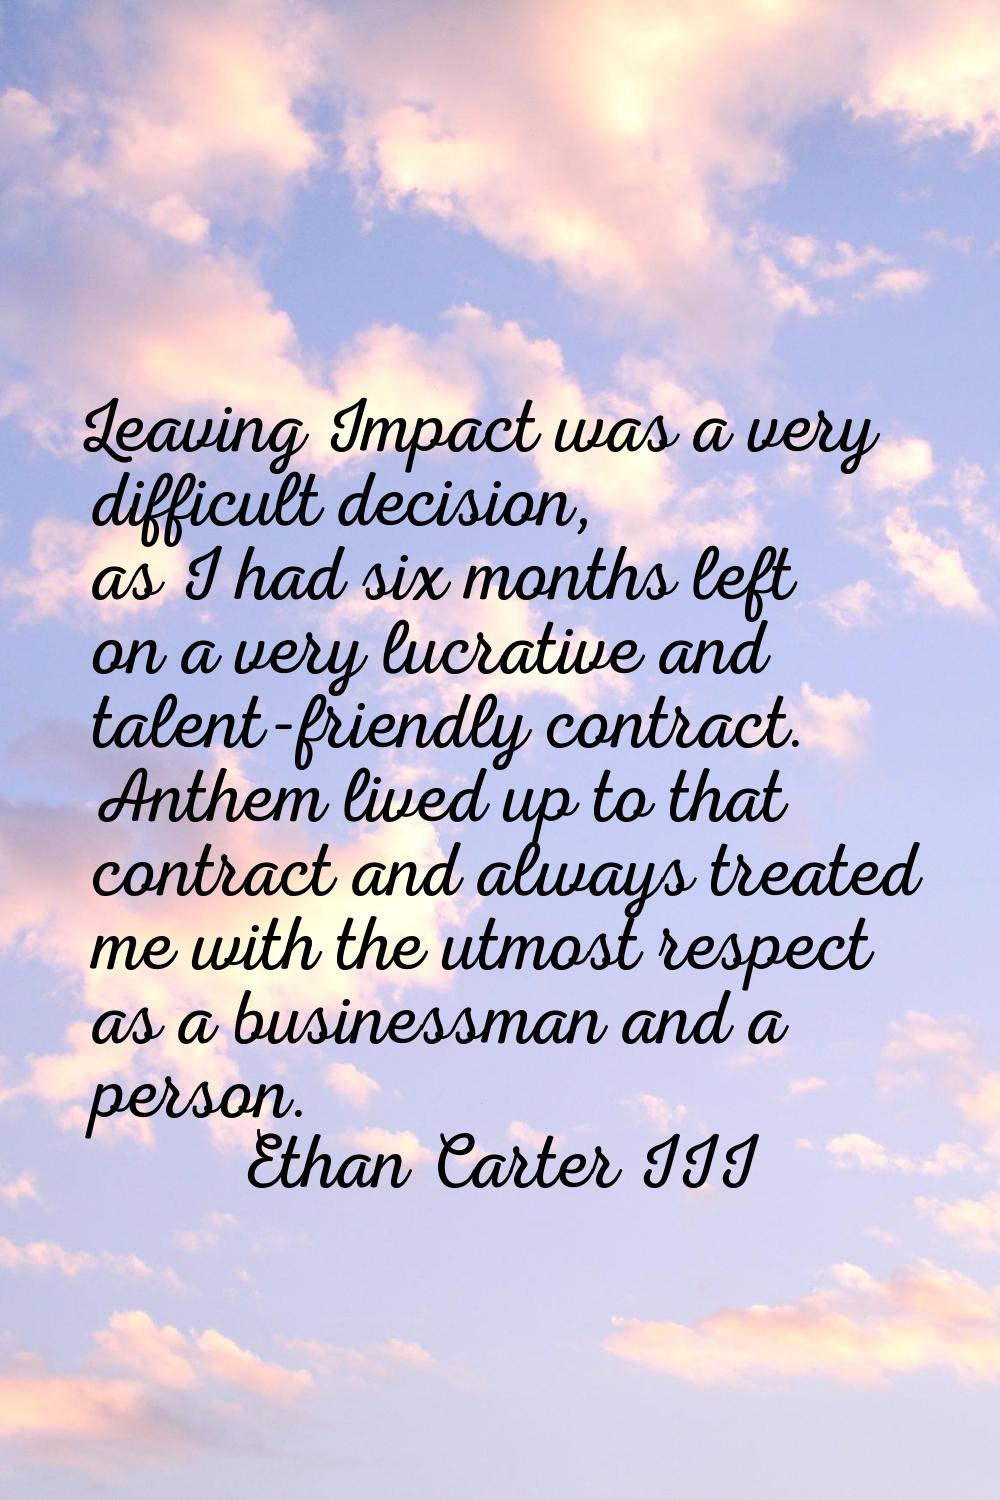 Leaving Impact was a very difficult decision, as I had six months left on a very lucrative and tale